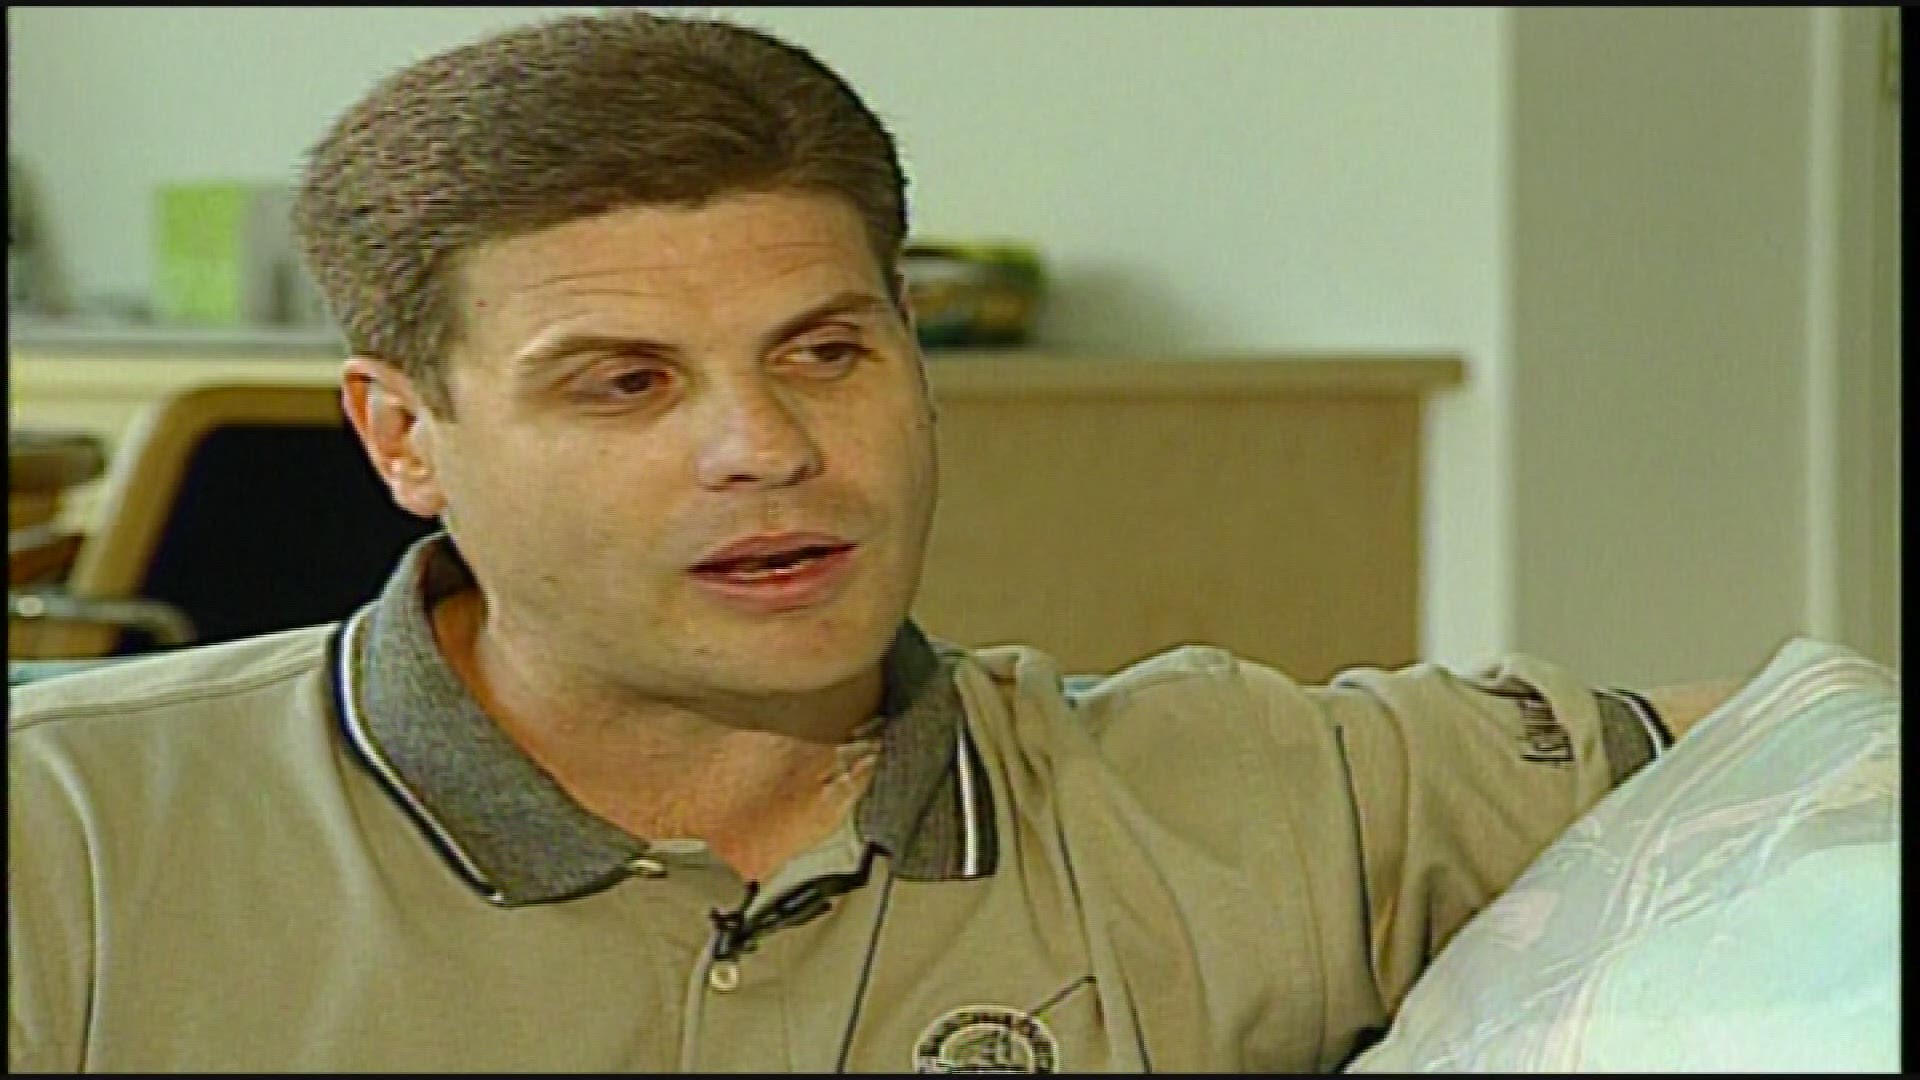 In 1998 Randy Shaver was the Sports anchor at KARE 11 when he was diagnosed with cancer. He decided to keep working during the five months of treatment. He sat down with Pat Miles to talk about his journey. Originally aired in 1998.